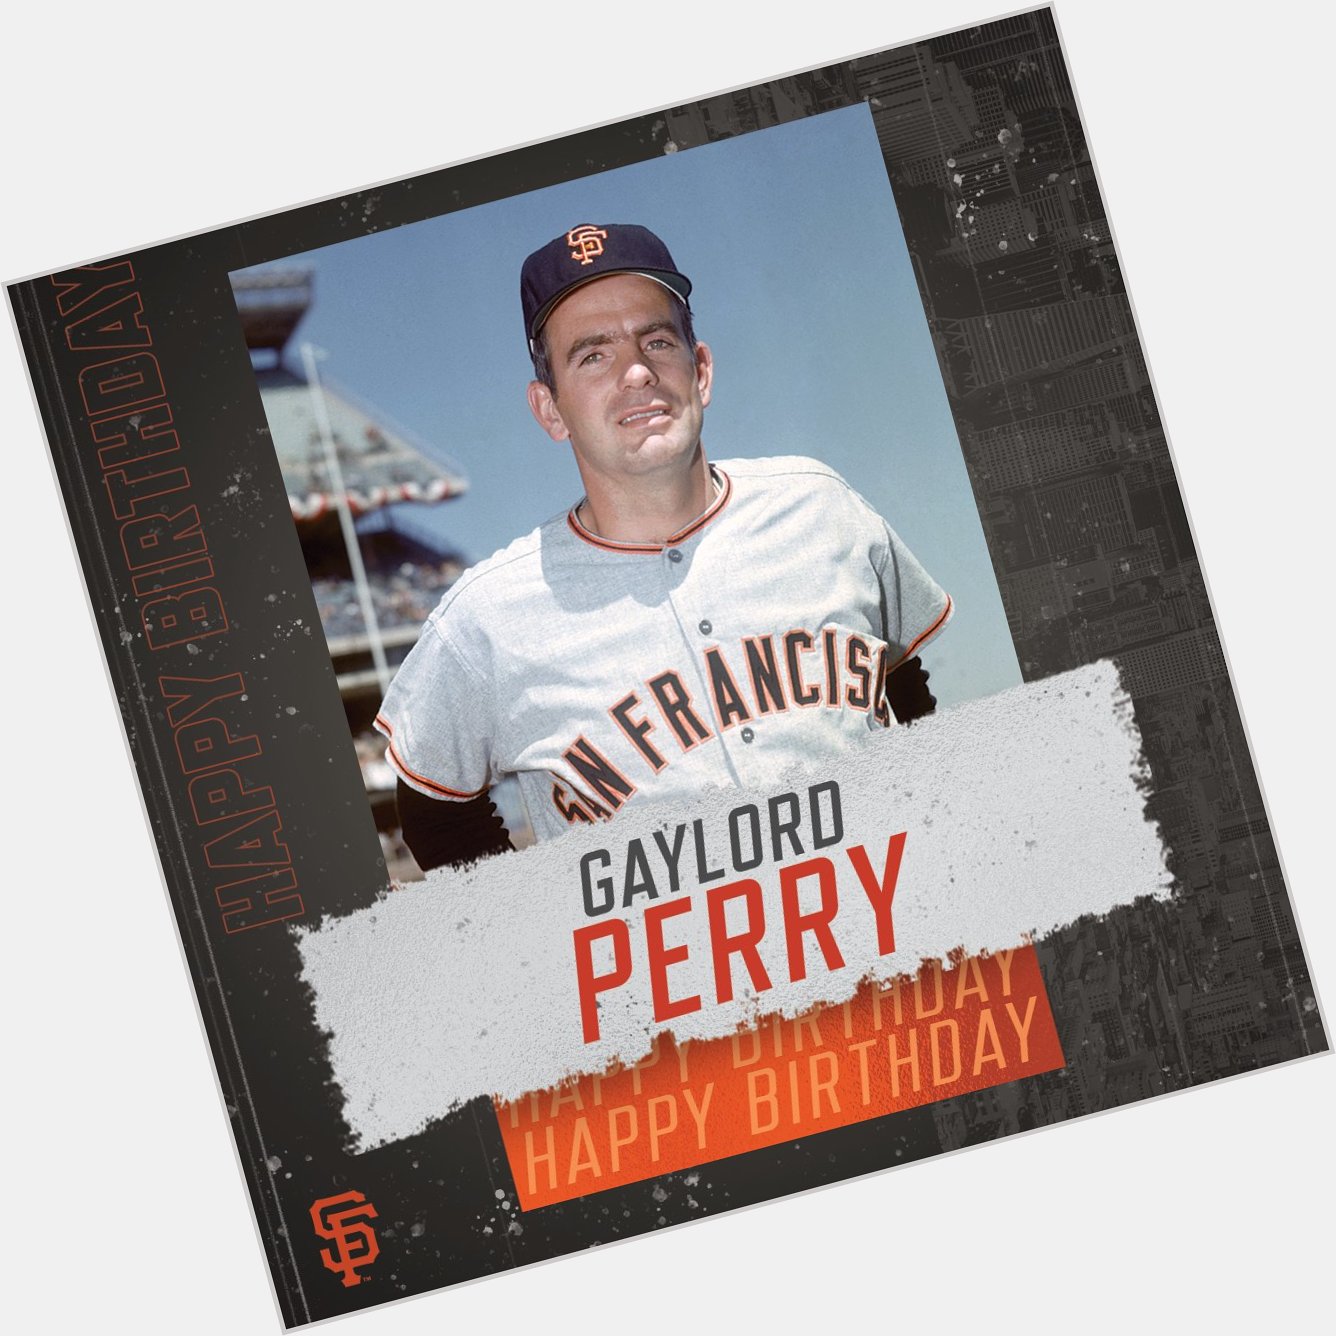 \"Happy Birthday to and Baseball Hall-of-Famer, Gaylord Perry 